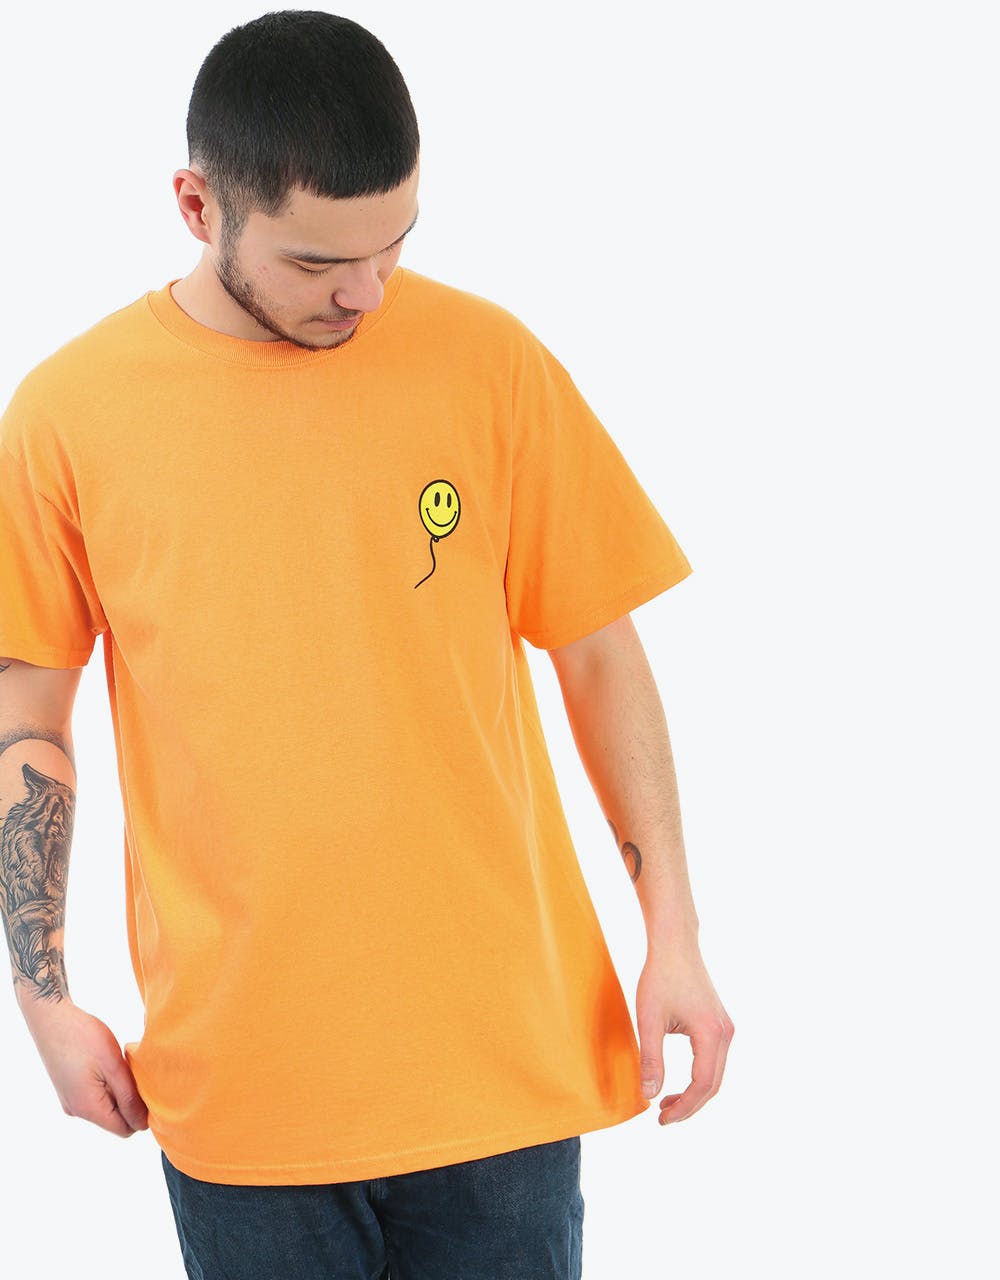 Route One Happy T-Shirt - Tangerine